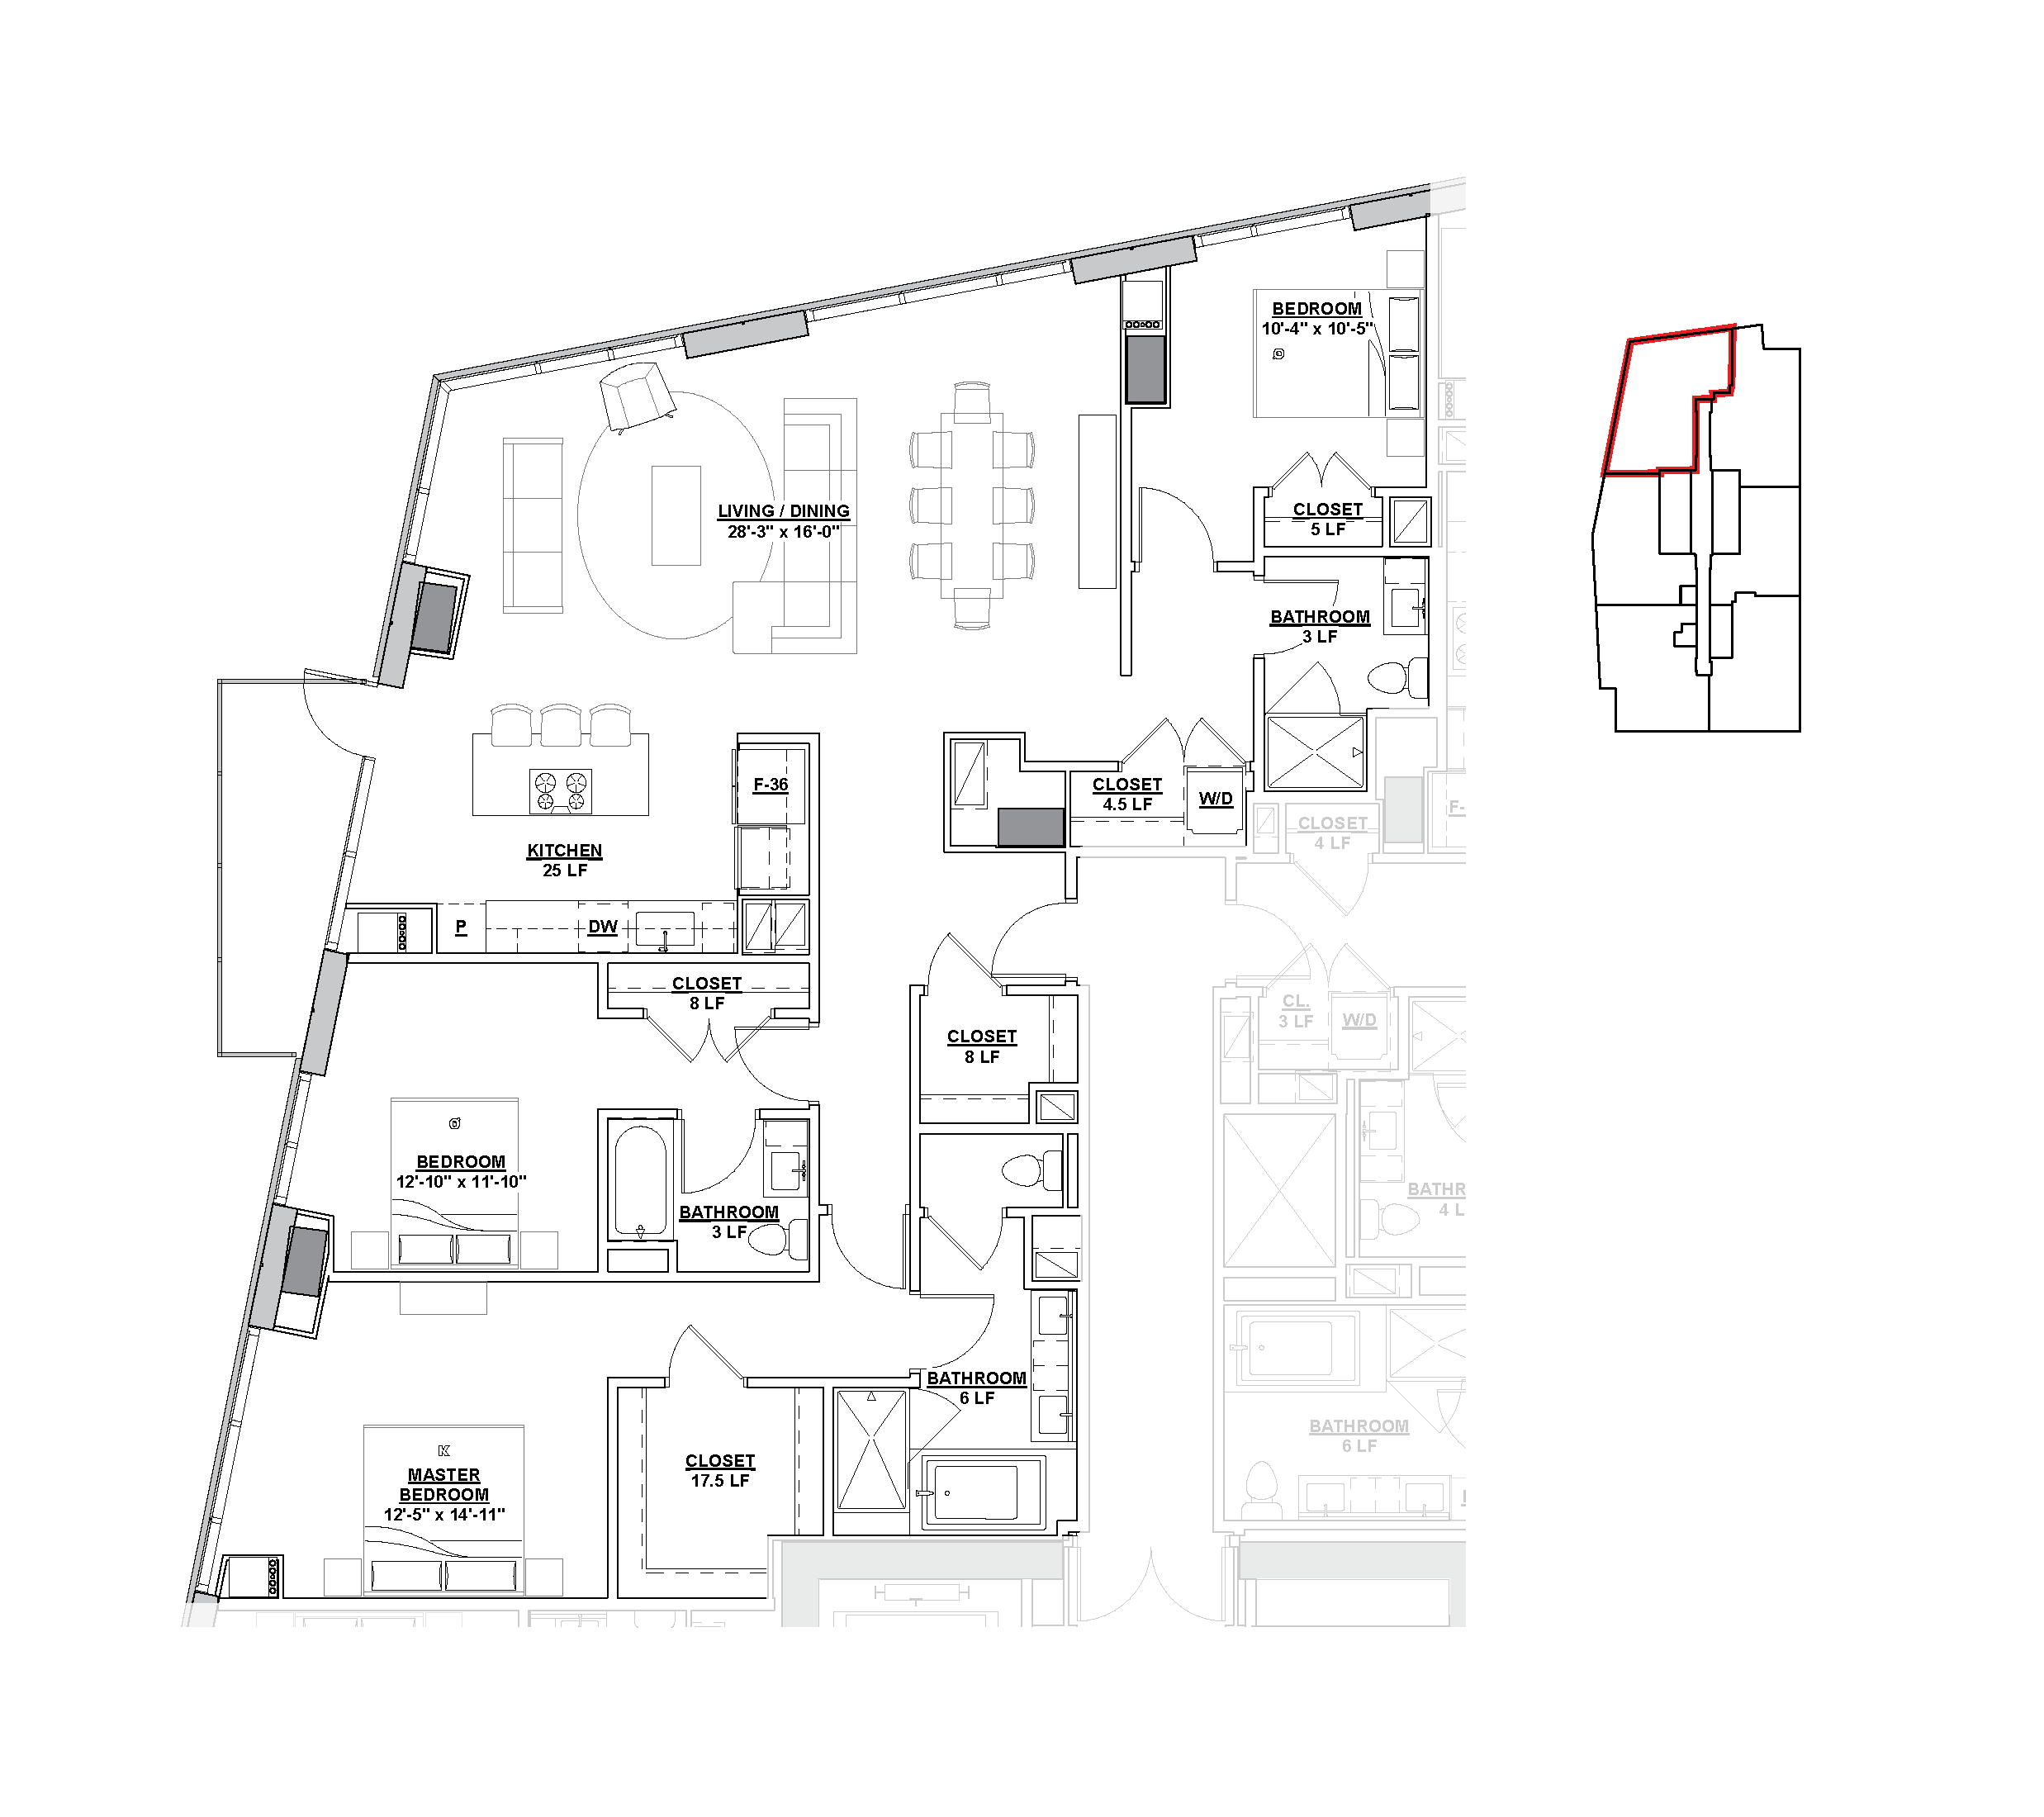 https://thelumencleveland.com/floorplans/marquee-penthouse/#detail-view